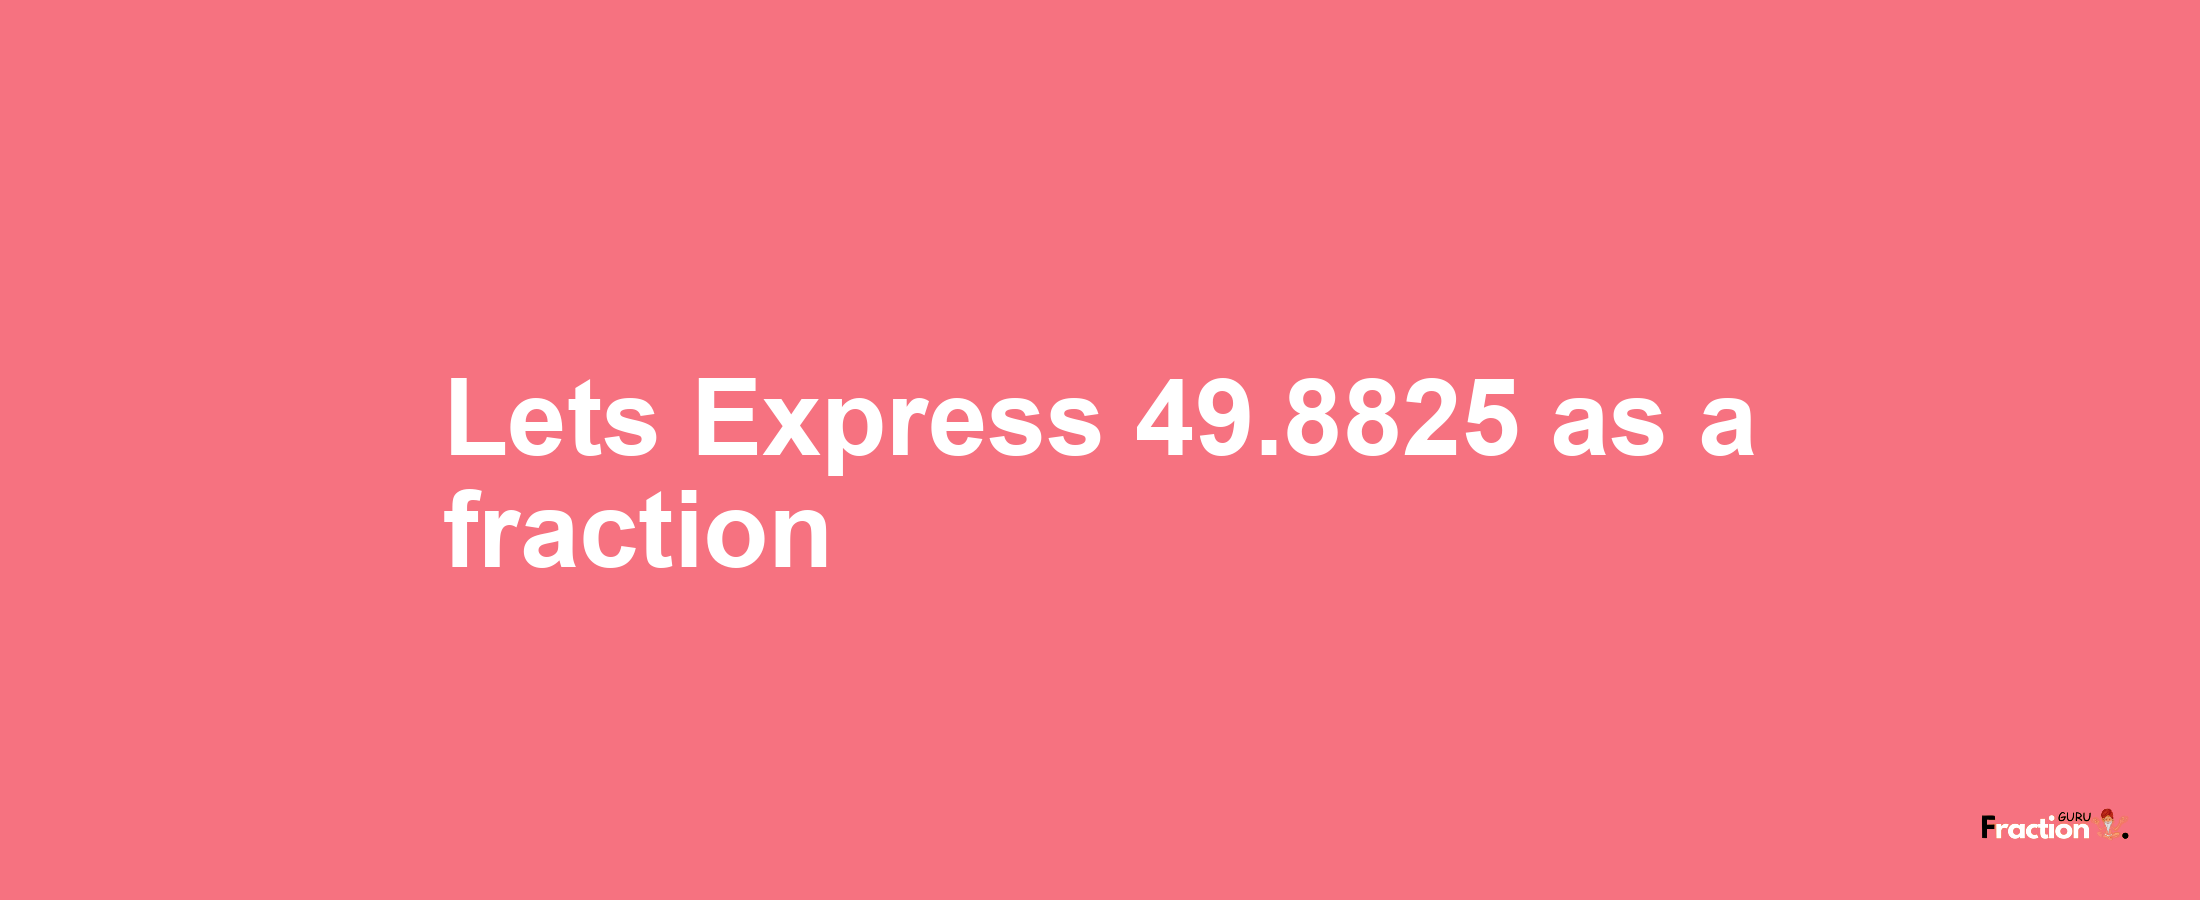 Lets Express 49.8825 as afraction